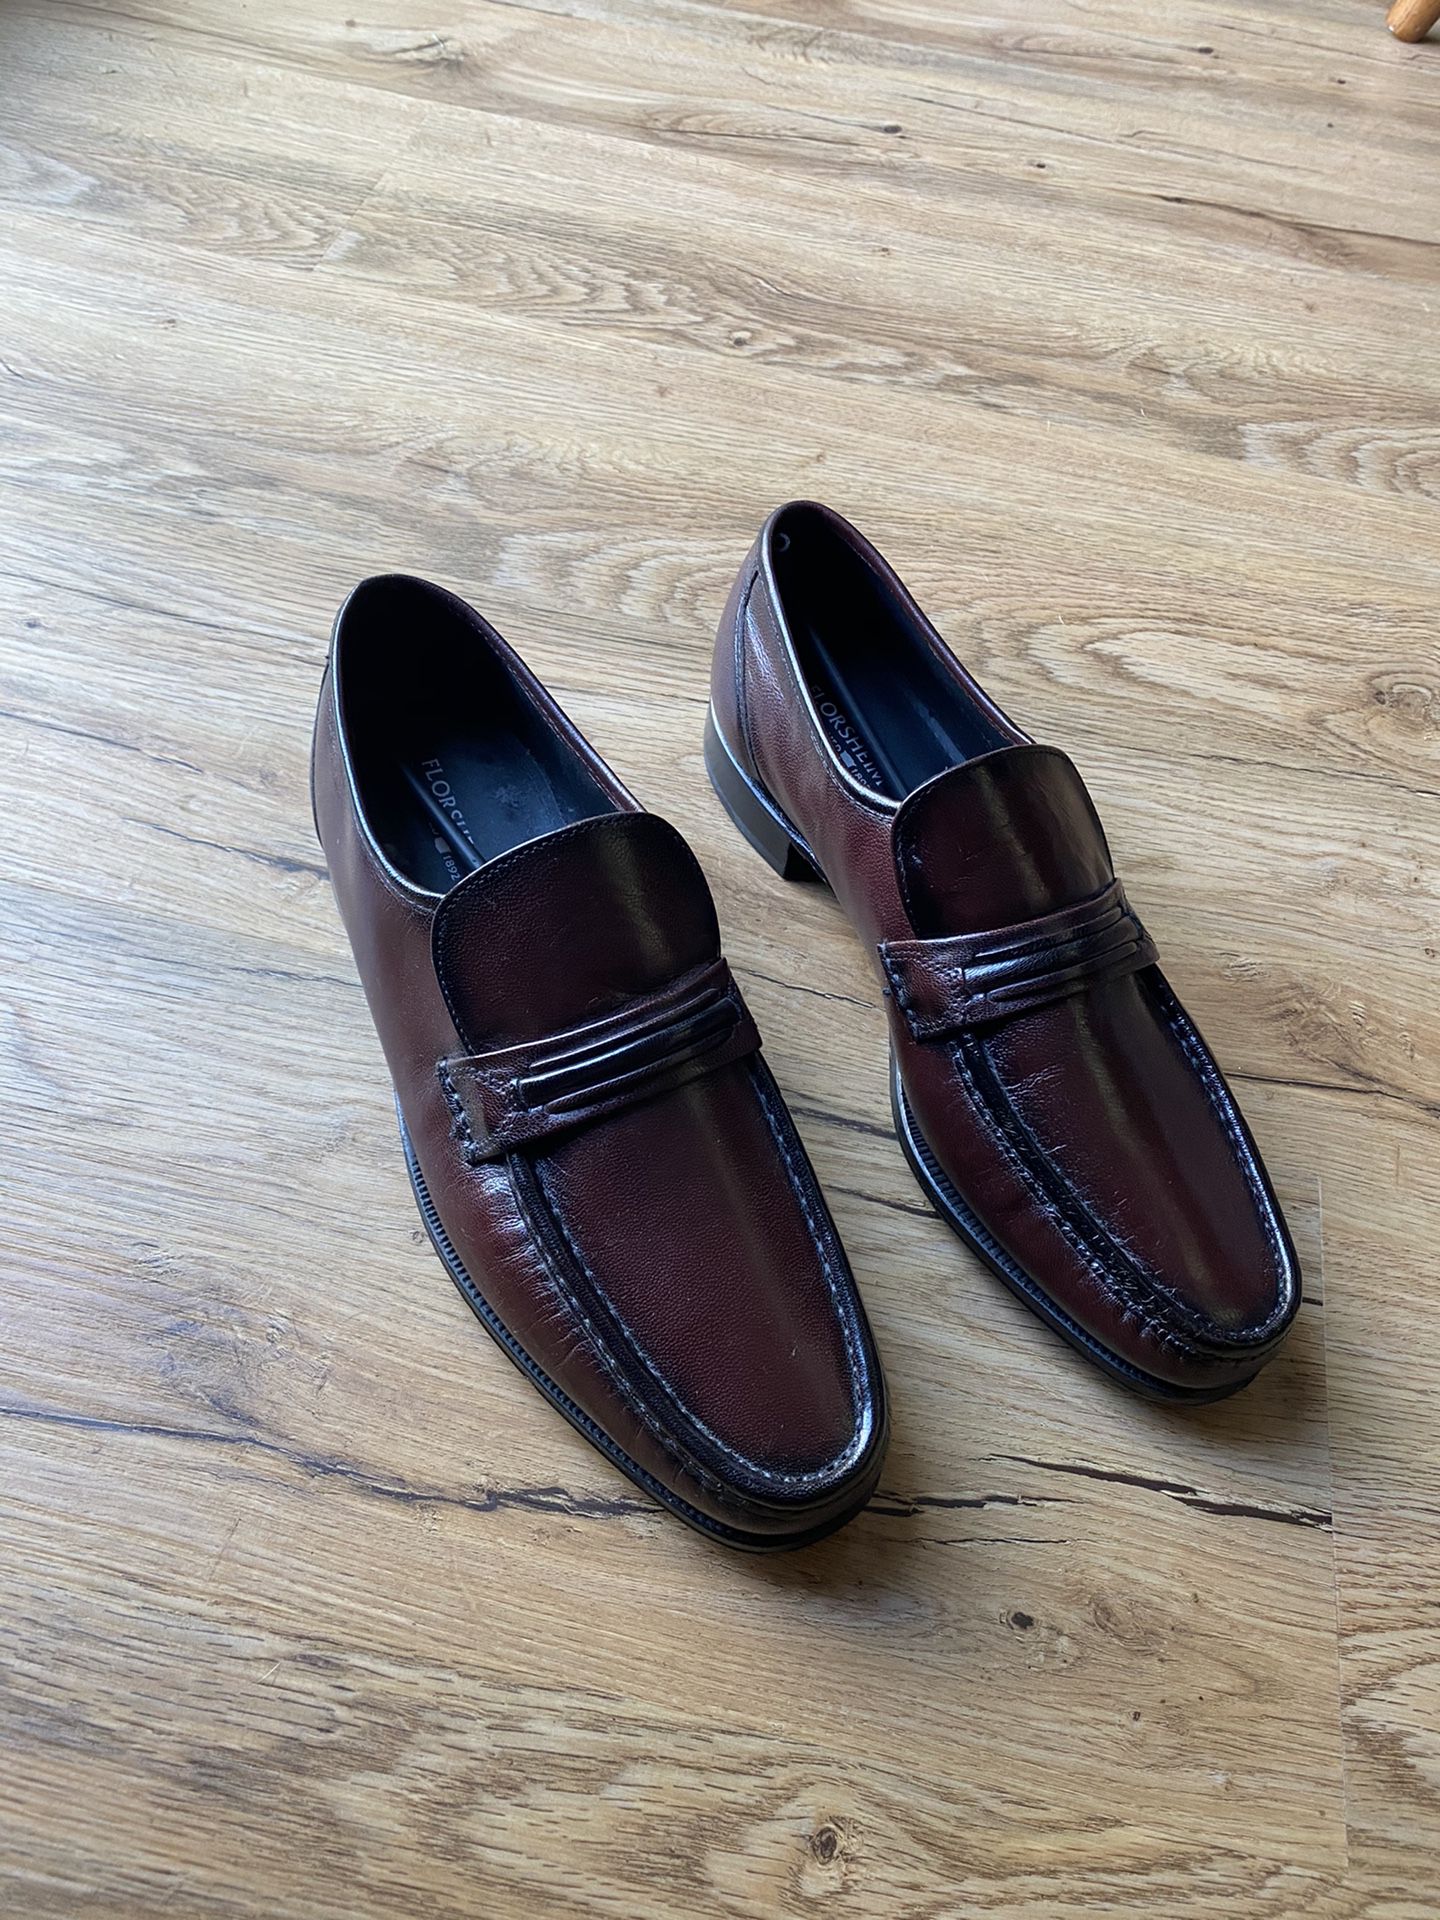 Florsheim Dress Shoes - Como Black Cherry Leather Dressy Slip On Size 9D - New in box